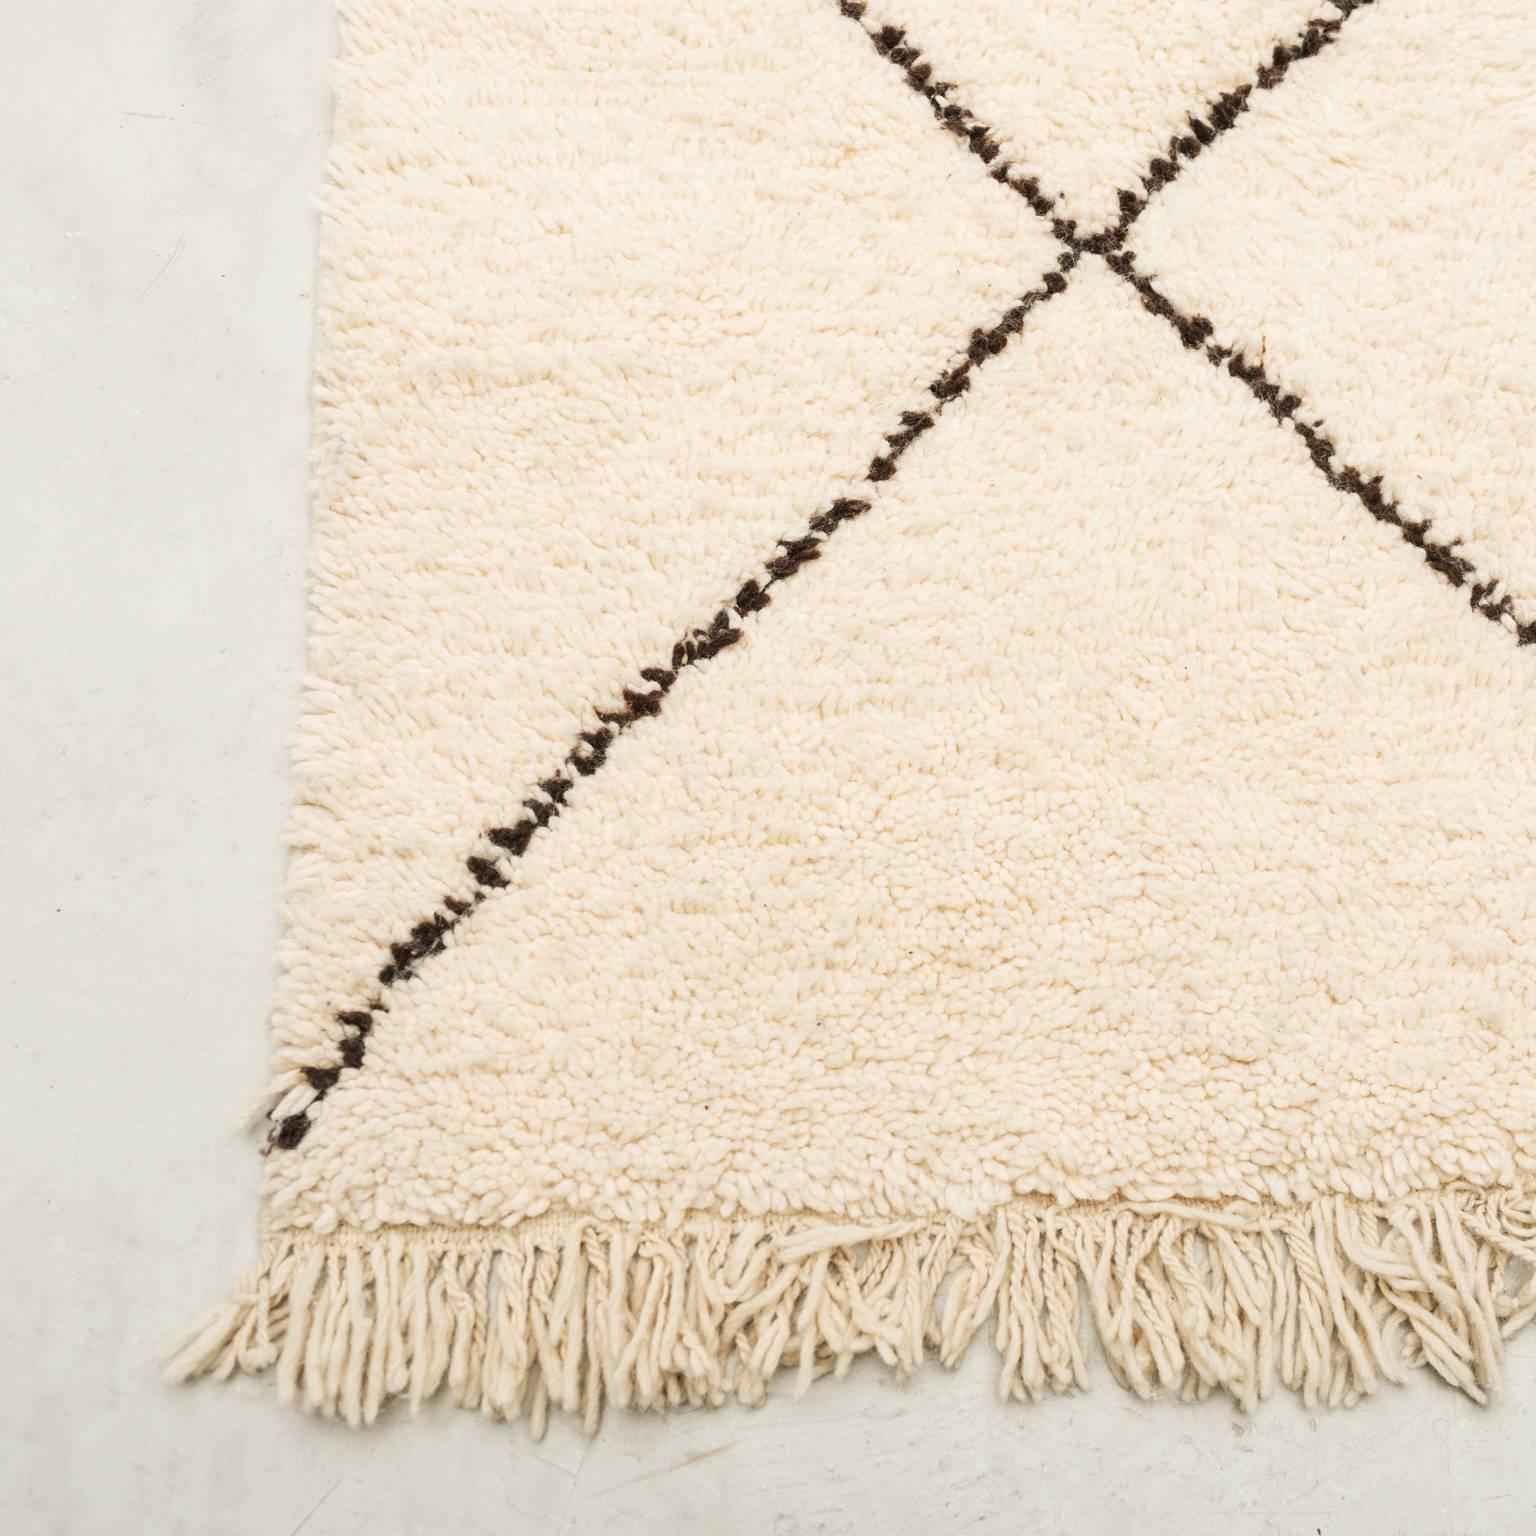 Hand-knotted with undyed natural shades of hand-spun sheep's wool creating a thick, shaggy, lustrous pile.